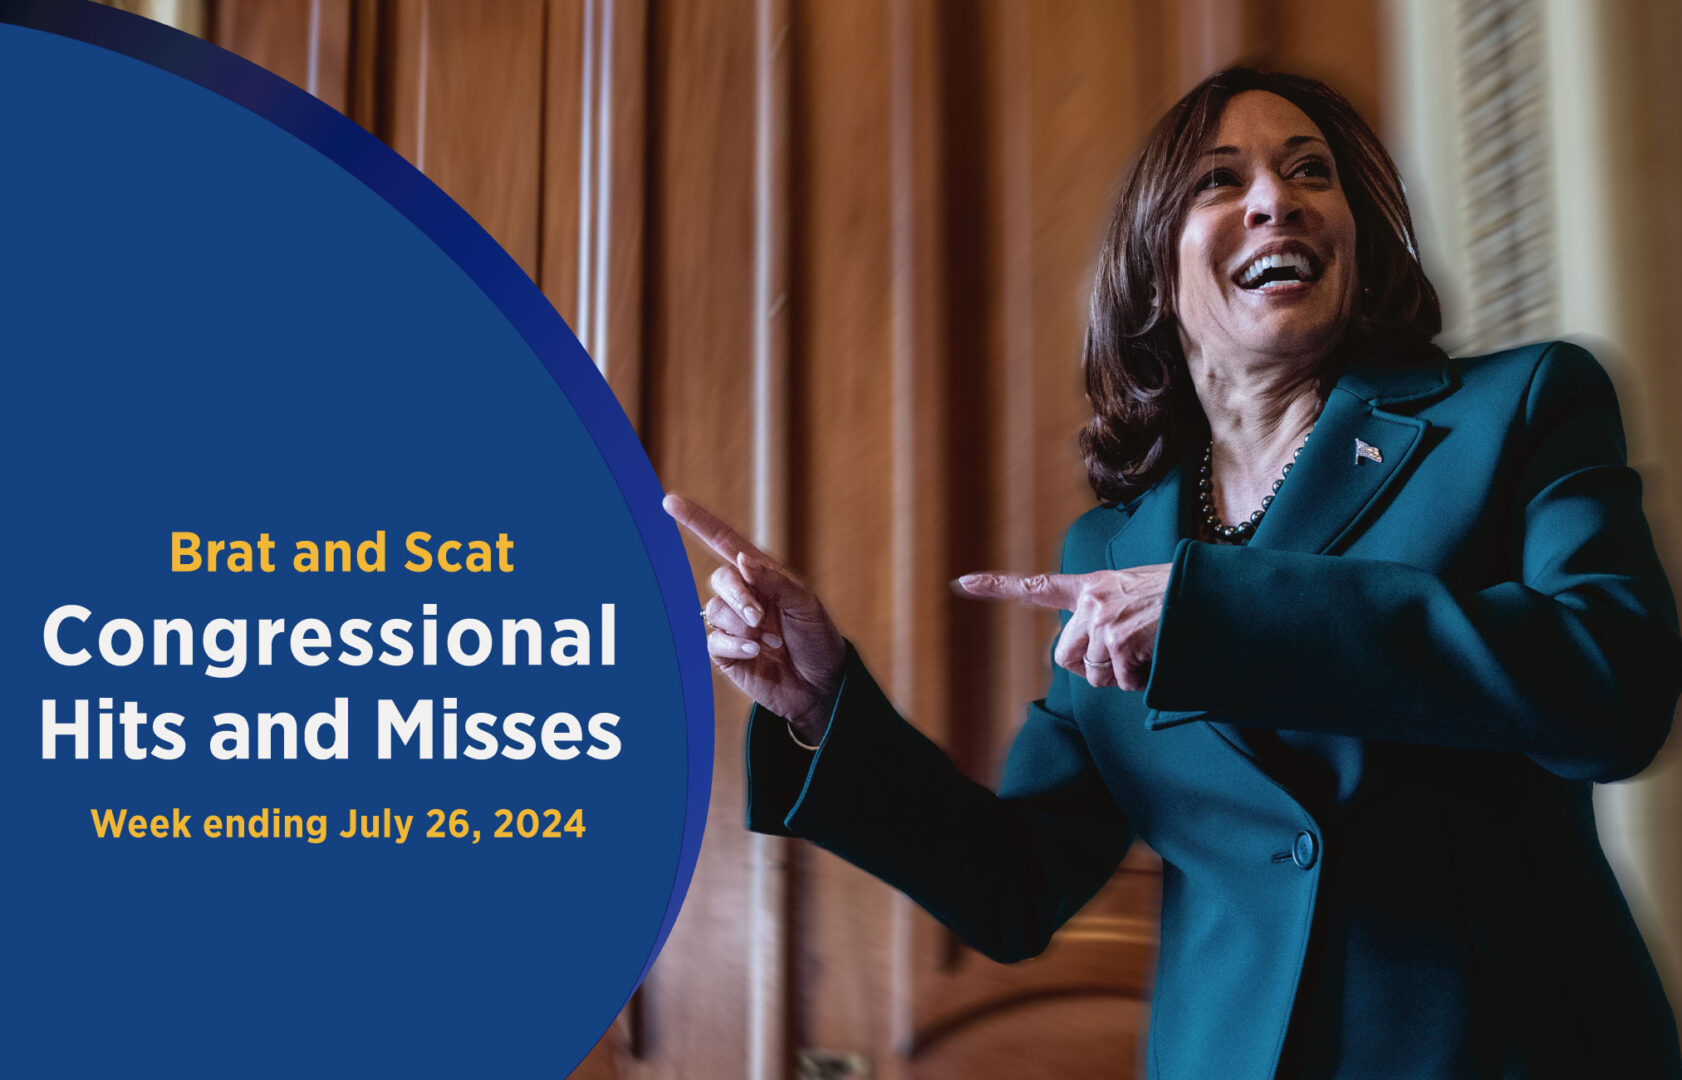 Brat and scat  Congressional Hits and Misses [Video]